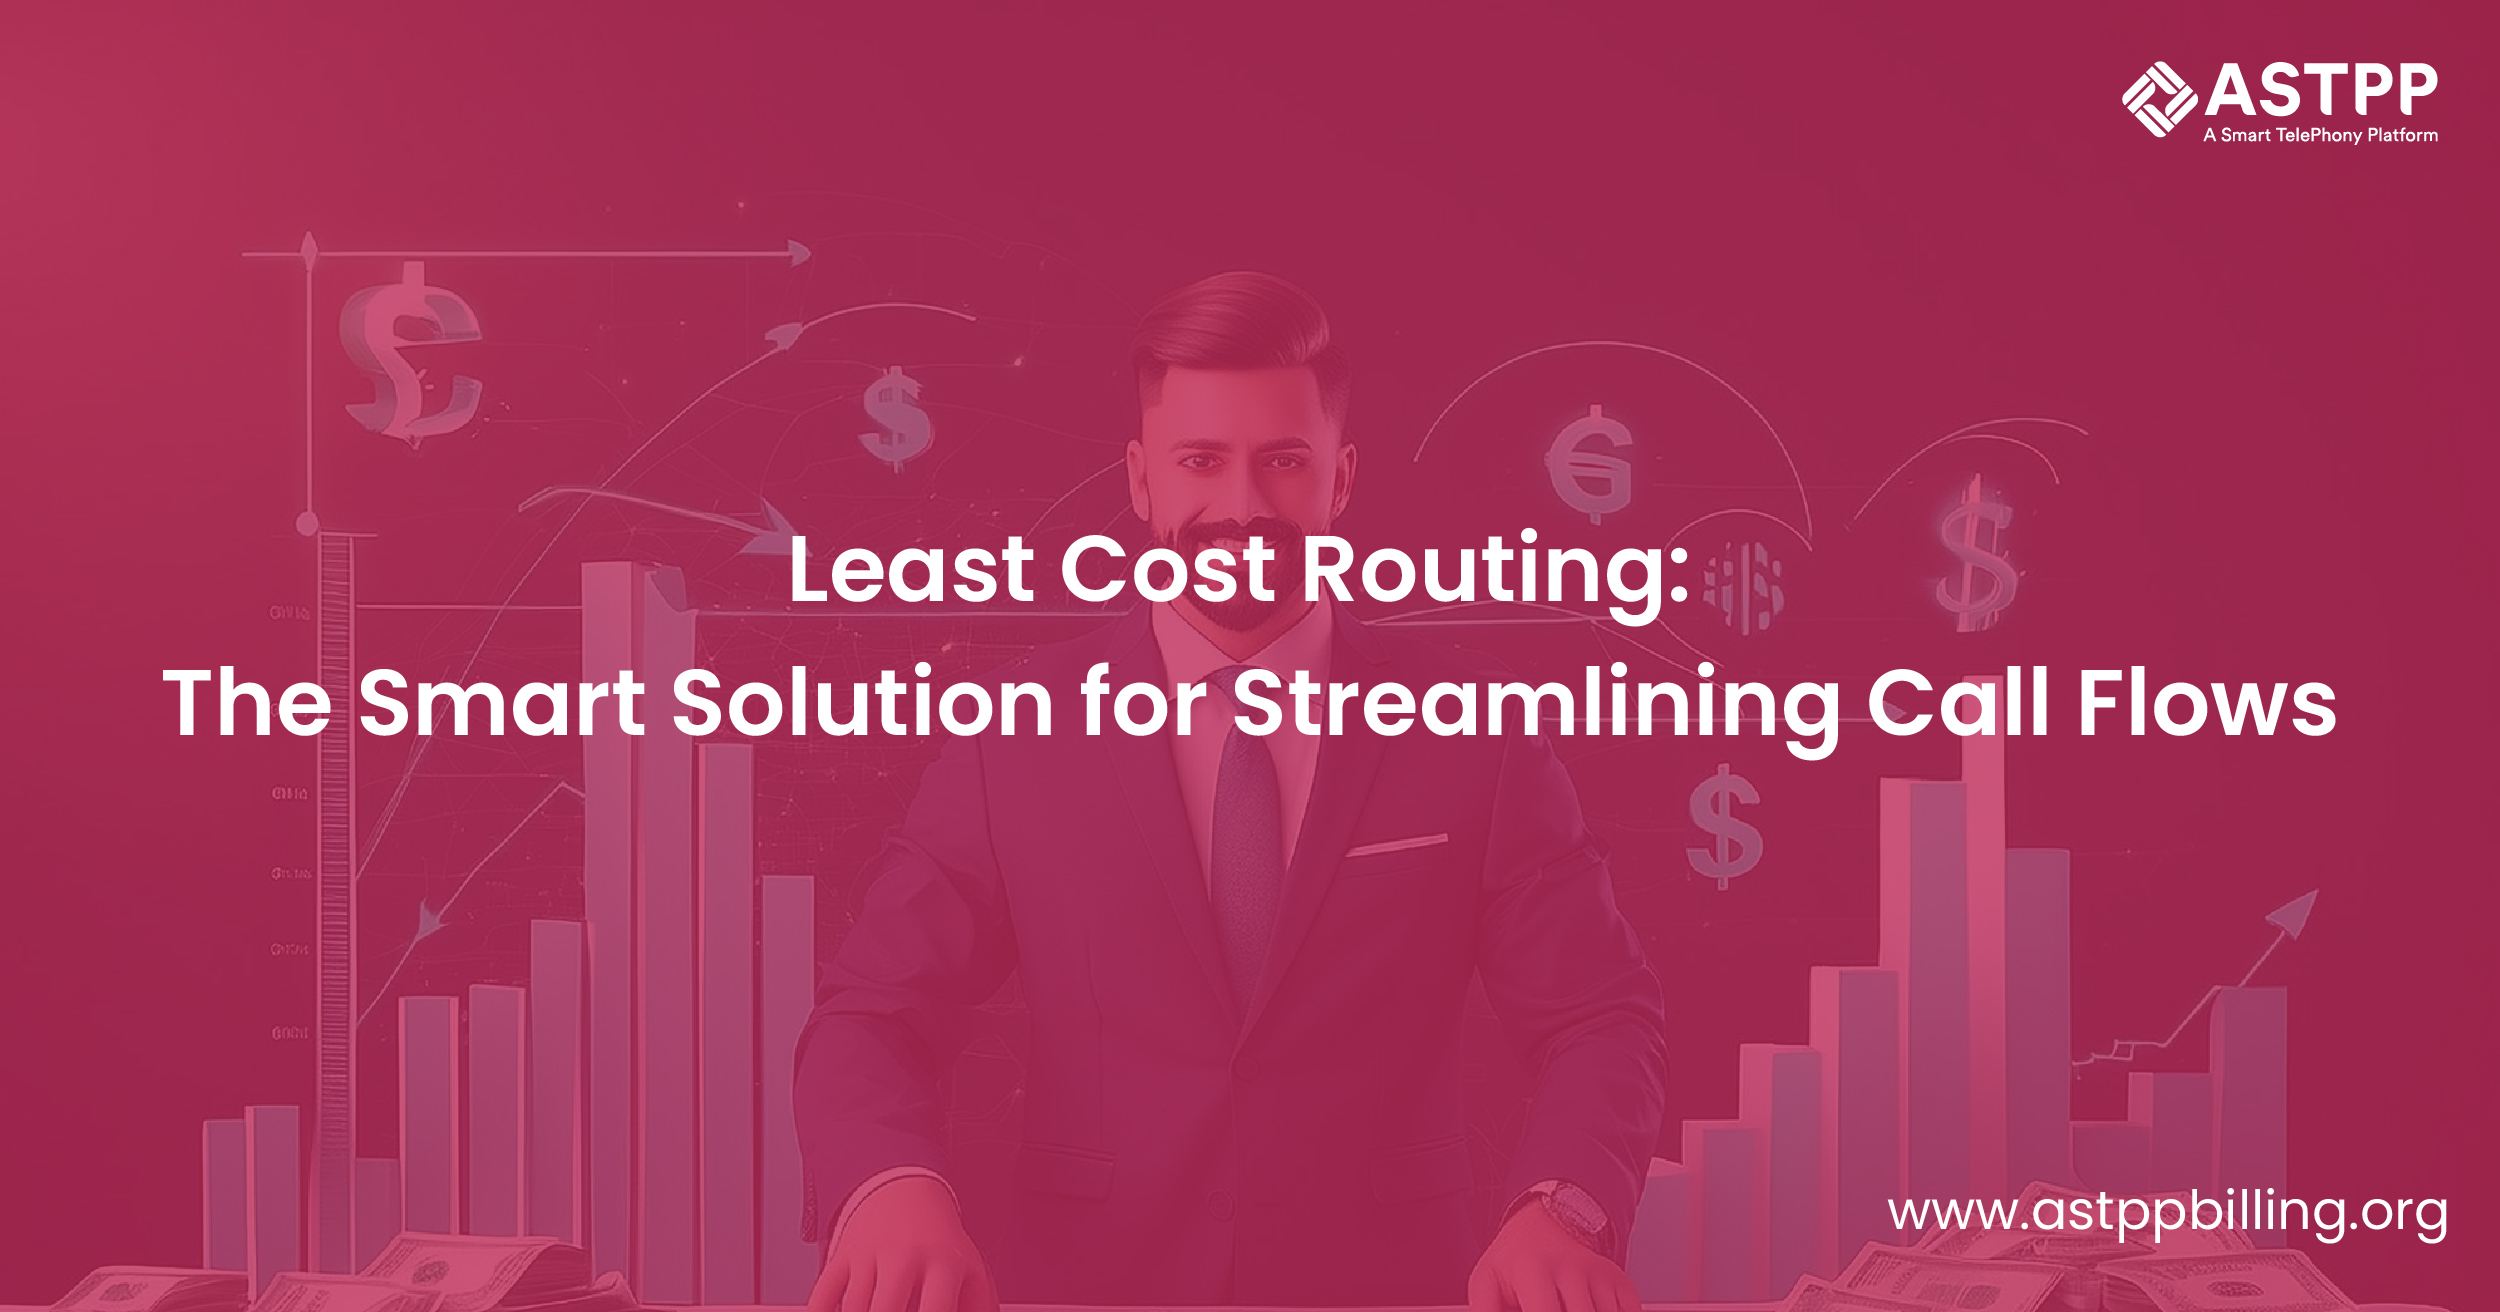 Least Cost Routing: An Effective Way to Route Calls